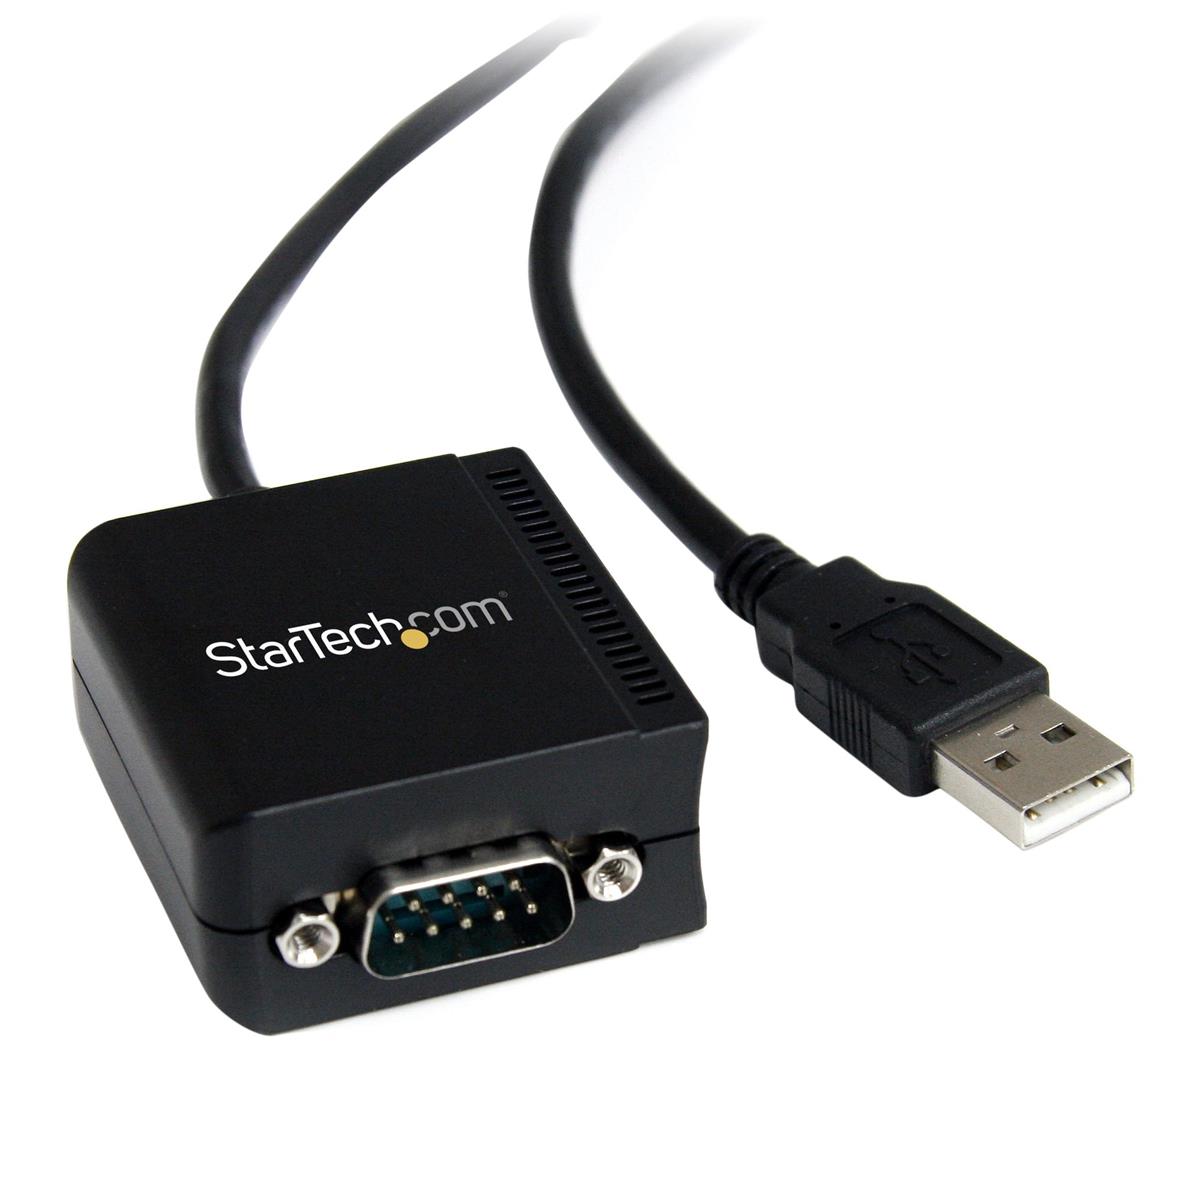 Photos - Other for Computer Startech.com StarTech 8' 1 Port FTDI USB to Serial RS232 Adapter Cable with Optical Iso 